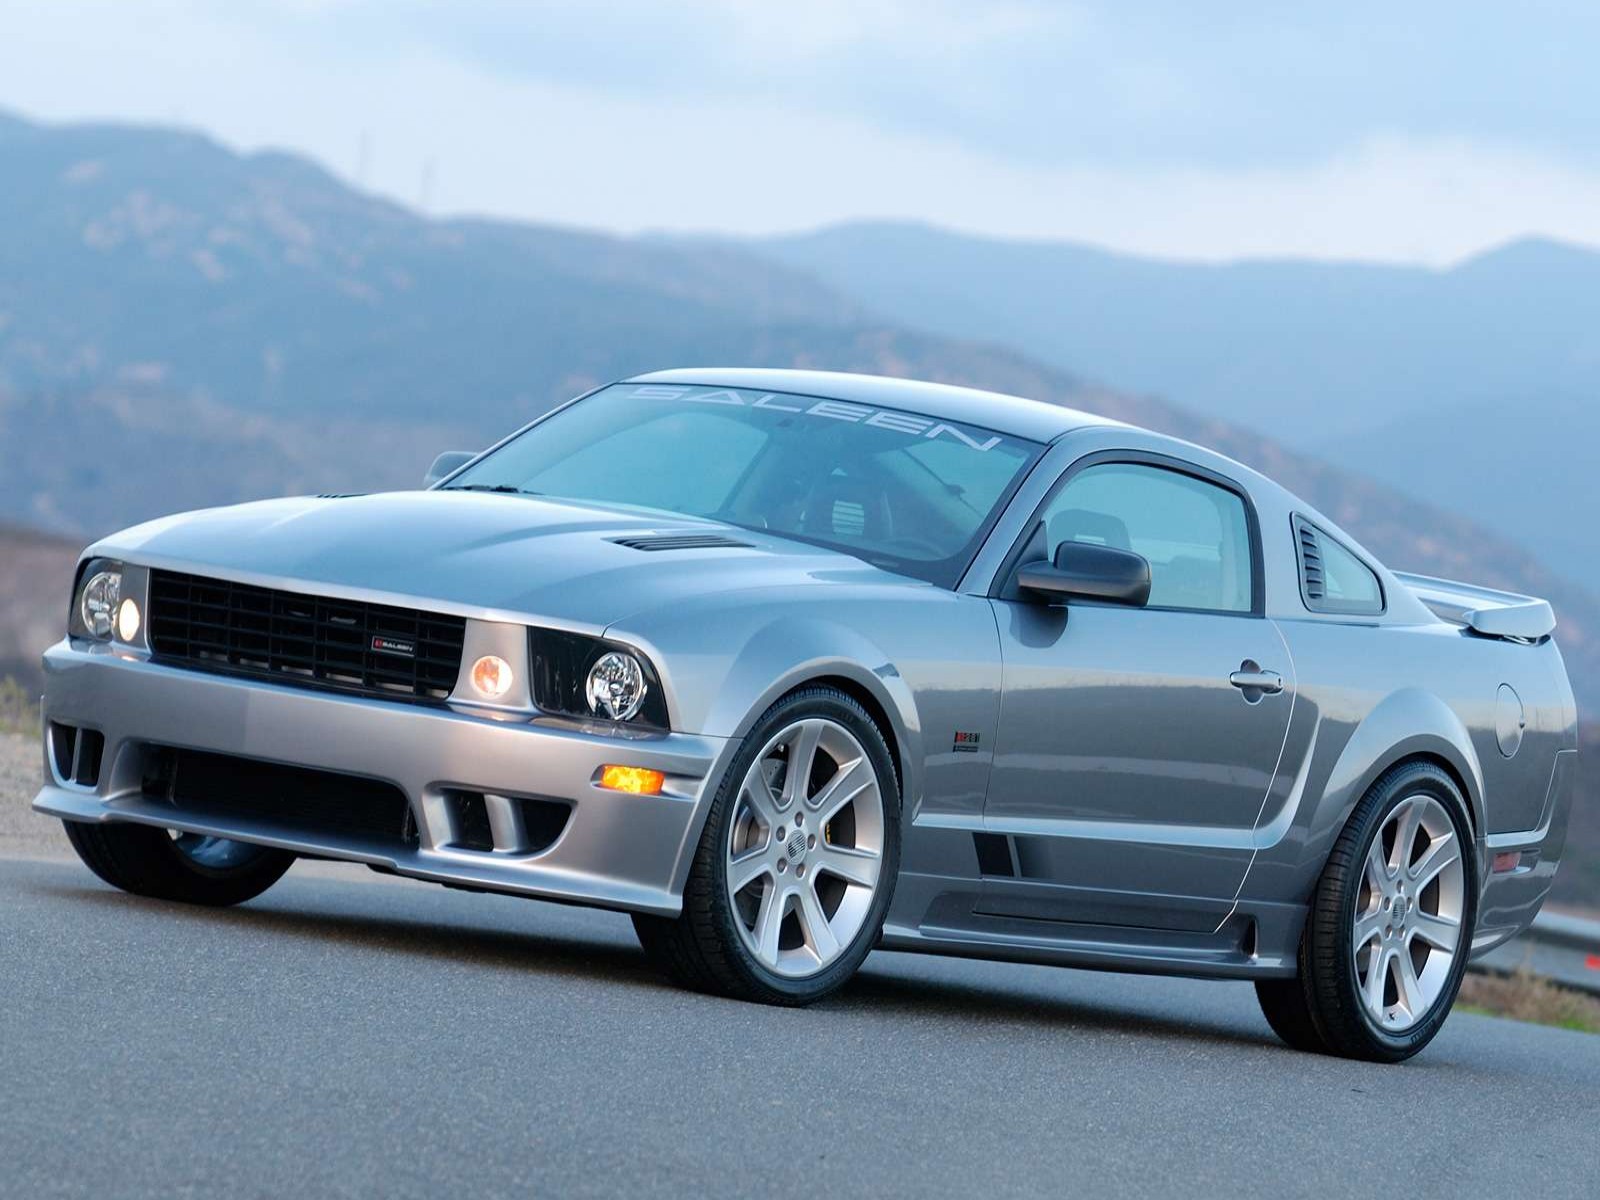 2000 Ford mustang saleen s281 supercharged